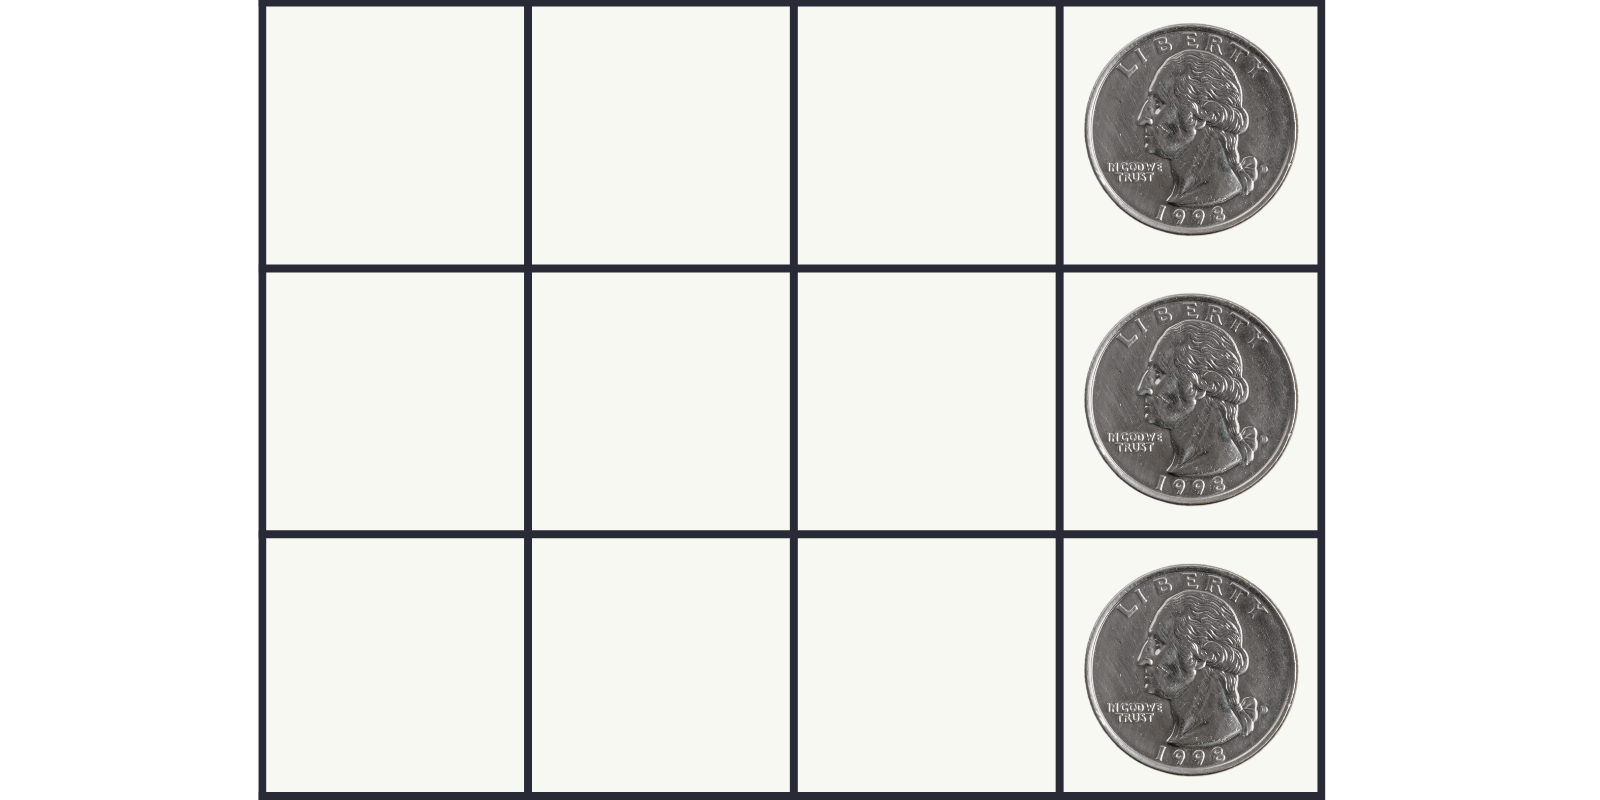 "The same 3 by 4 grid containing a coin per row, with all coins on the rightmost column."